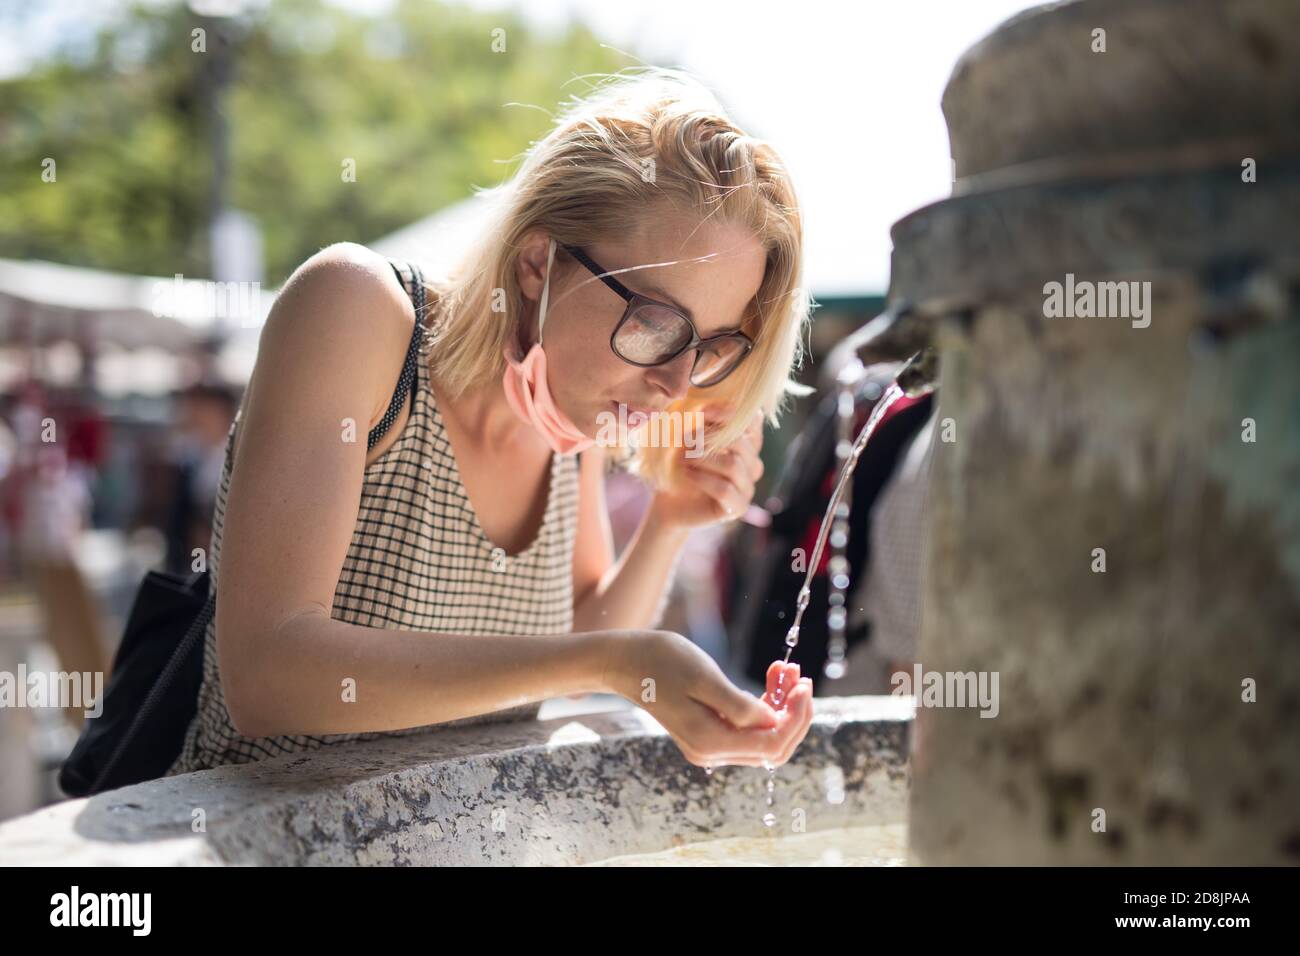 Thirsty young casual cucasian woman wearing medical face mask drinking water from public city fountain on a hot summer day. New social norms during Stock Photo